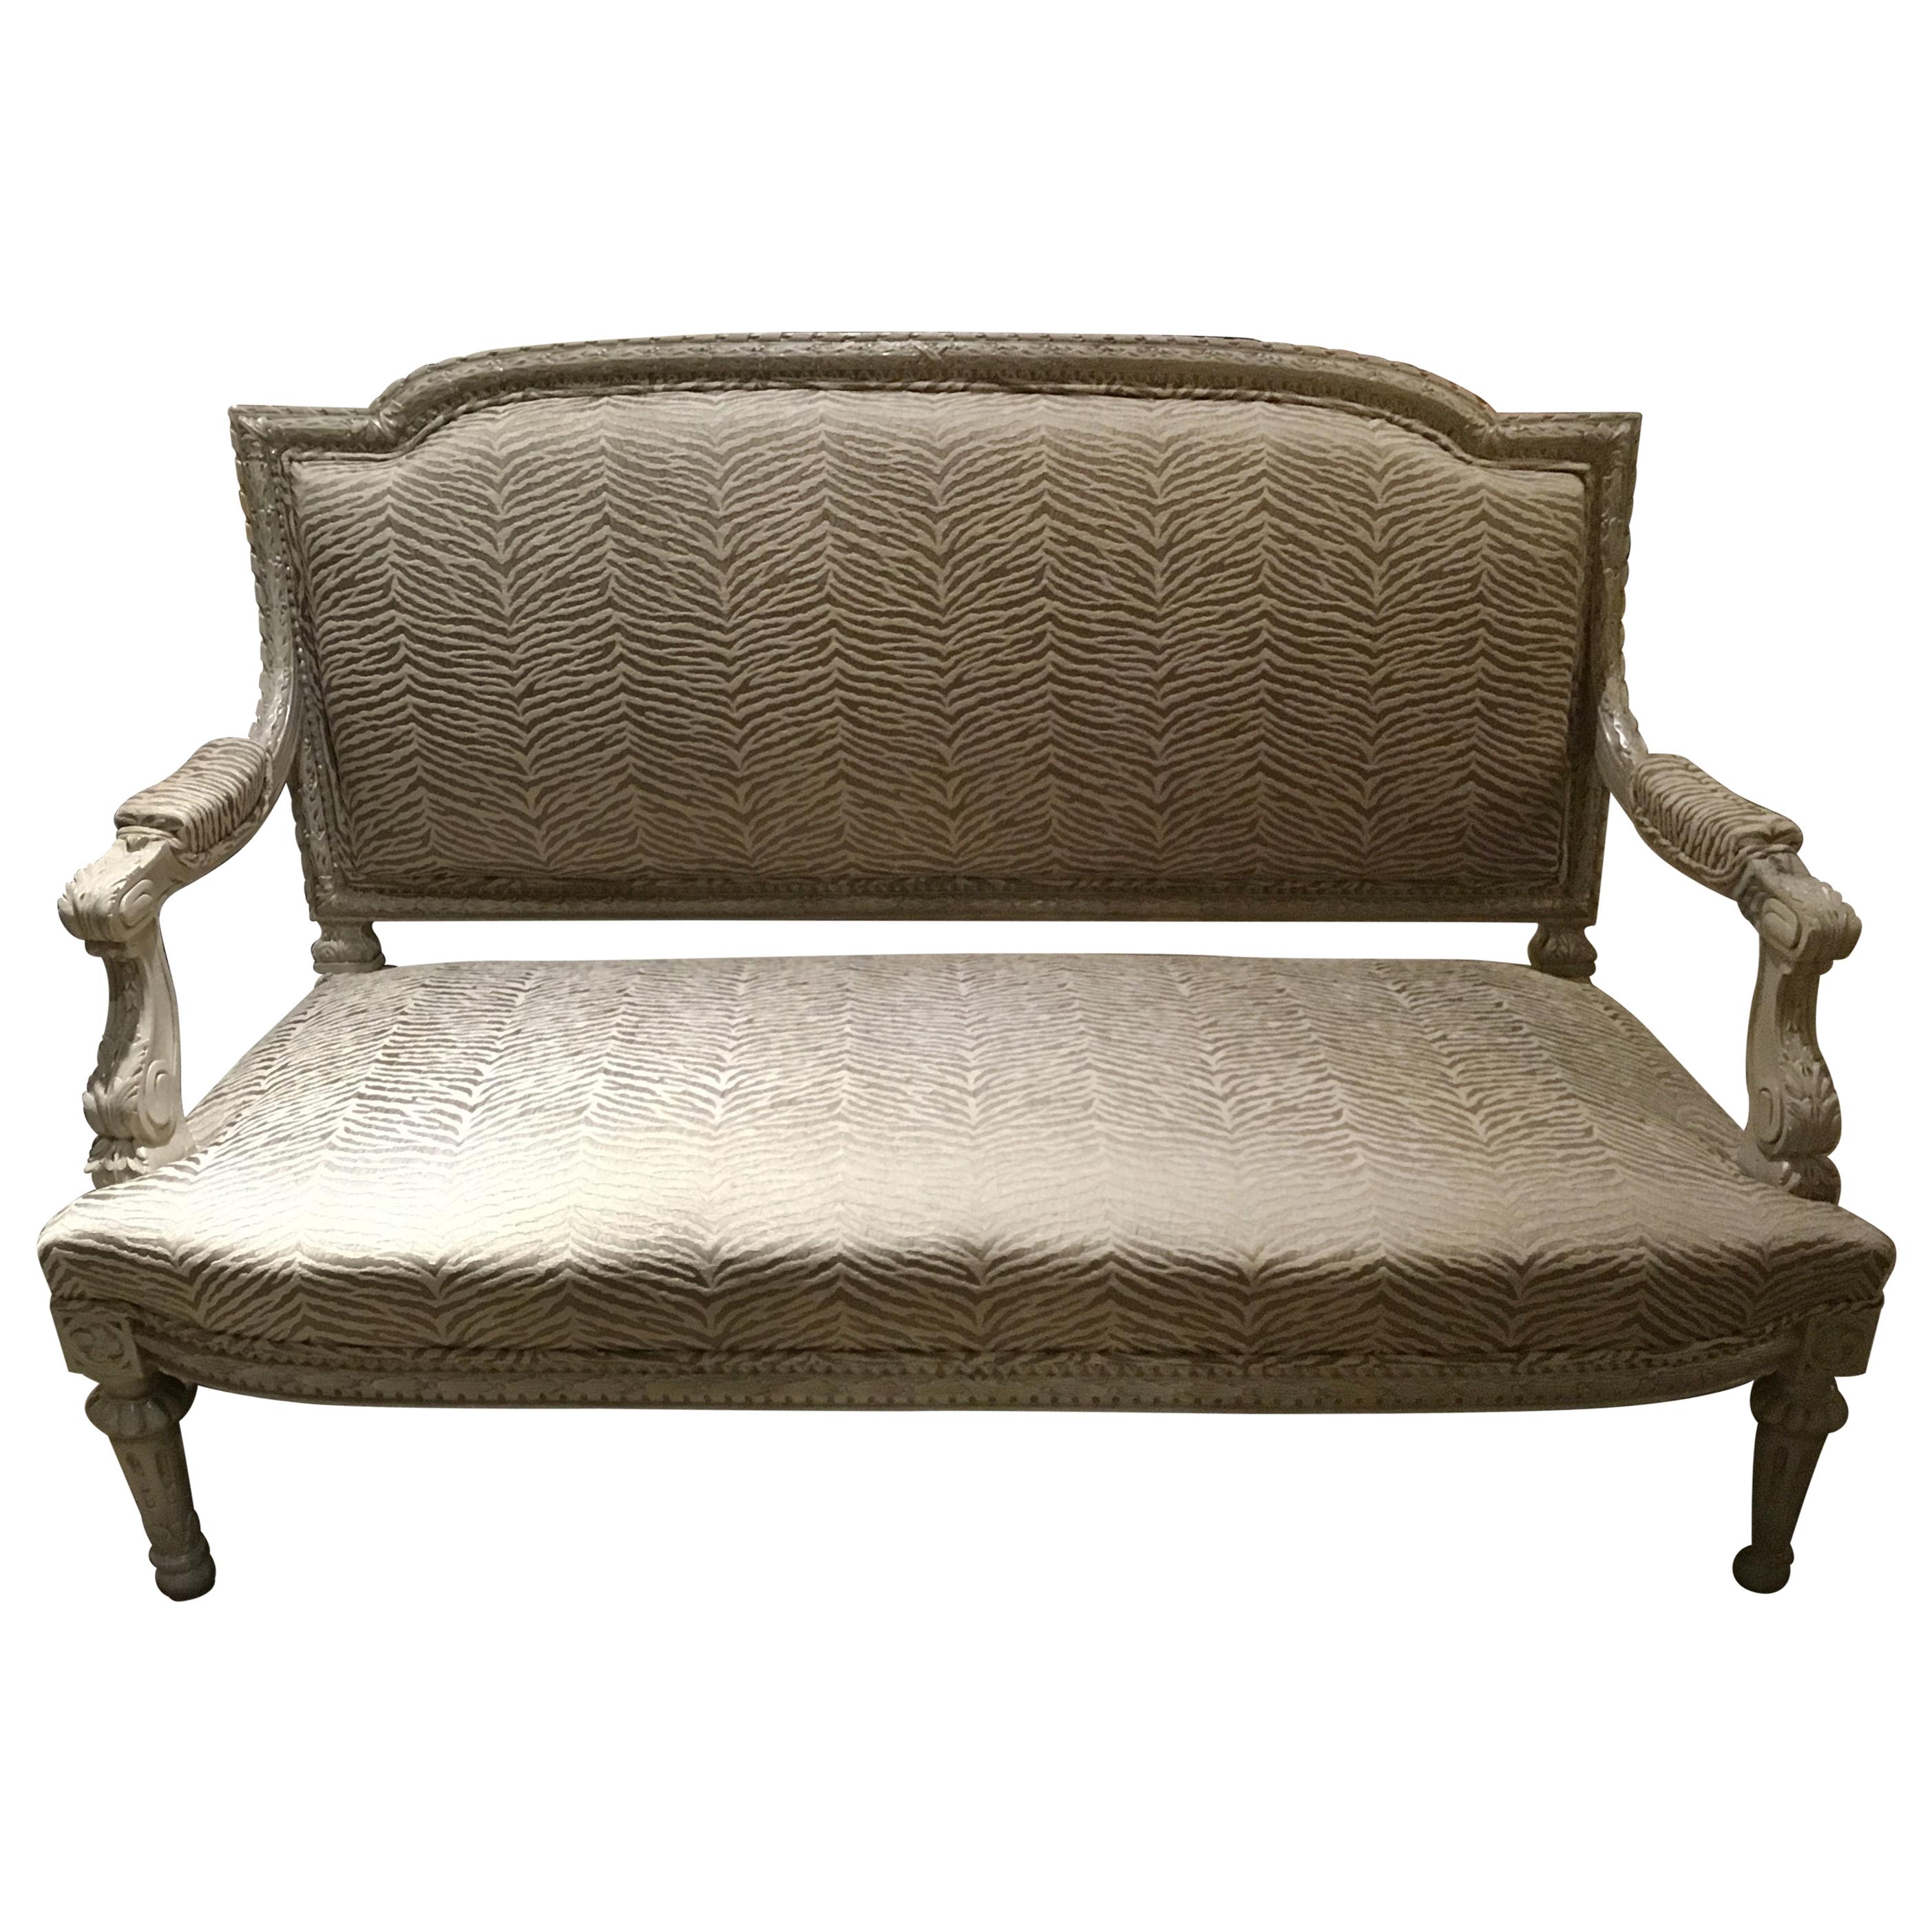 Louis XVI-Style Settee or Loveseat Polychromed with New Upholstery, 19th Century